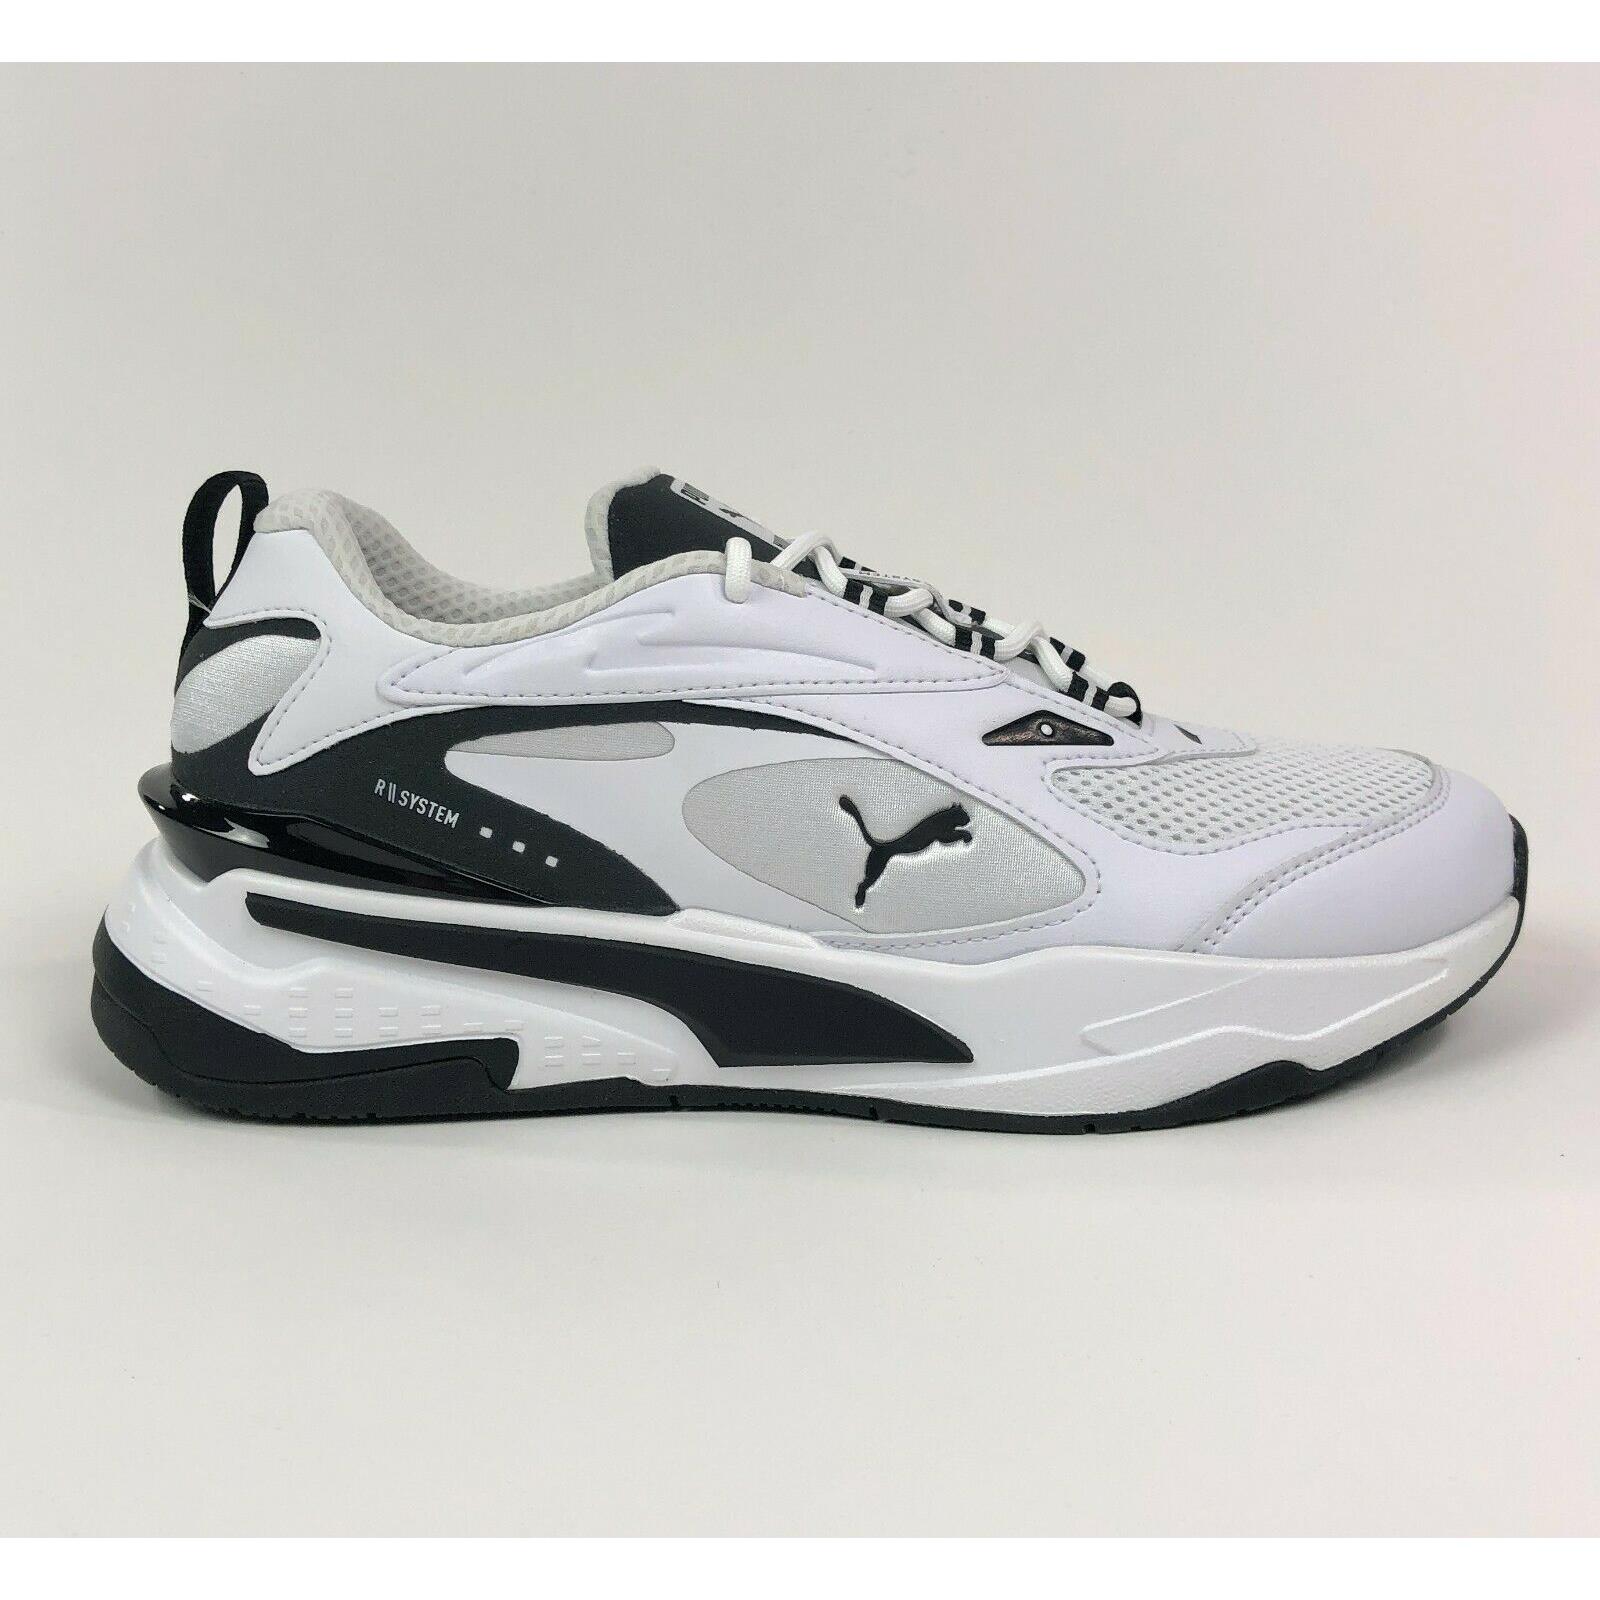 Puma Rs-fast Shoes Sneakers Mens 11 White Black Low Athletic Casual 380562-03